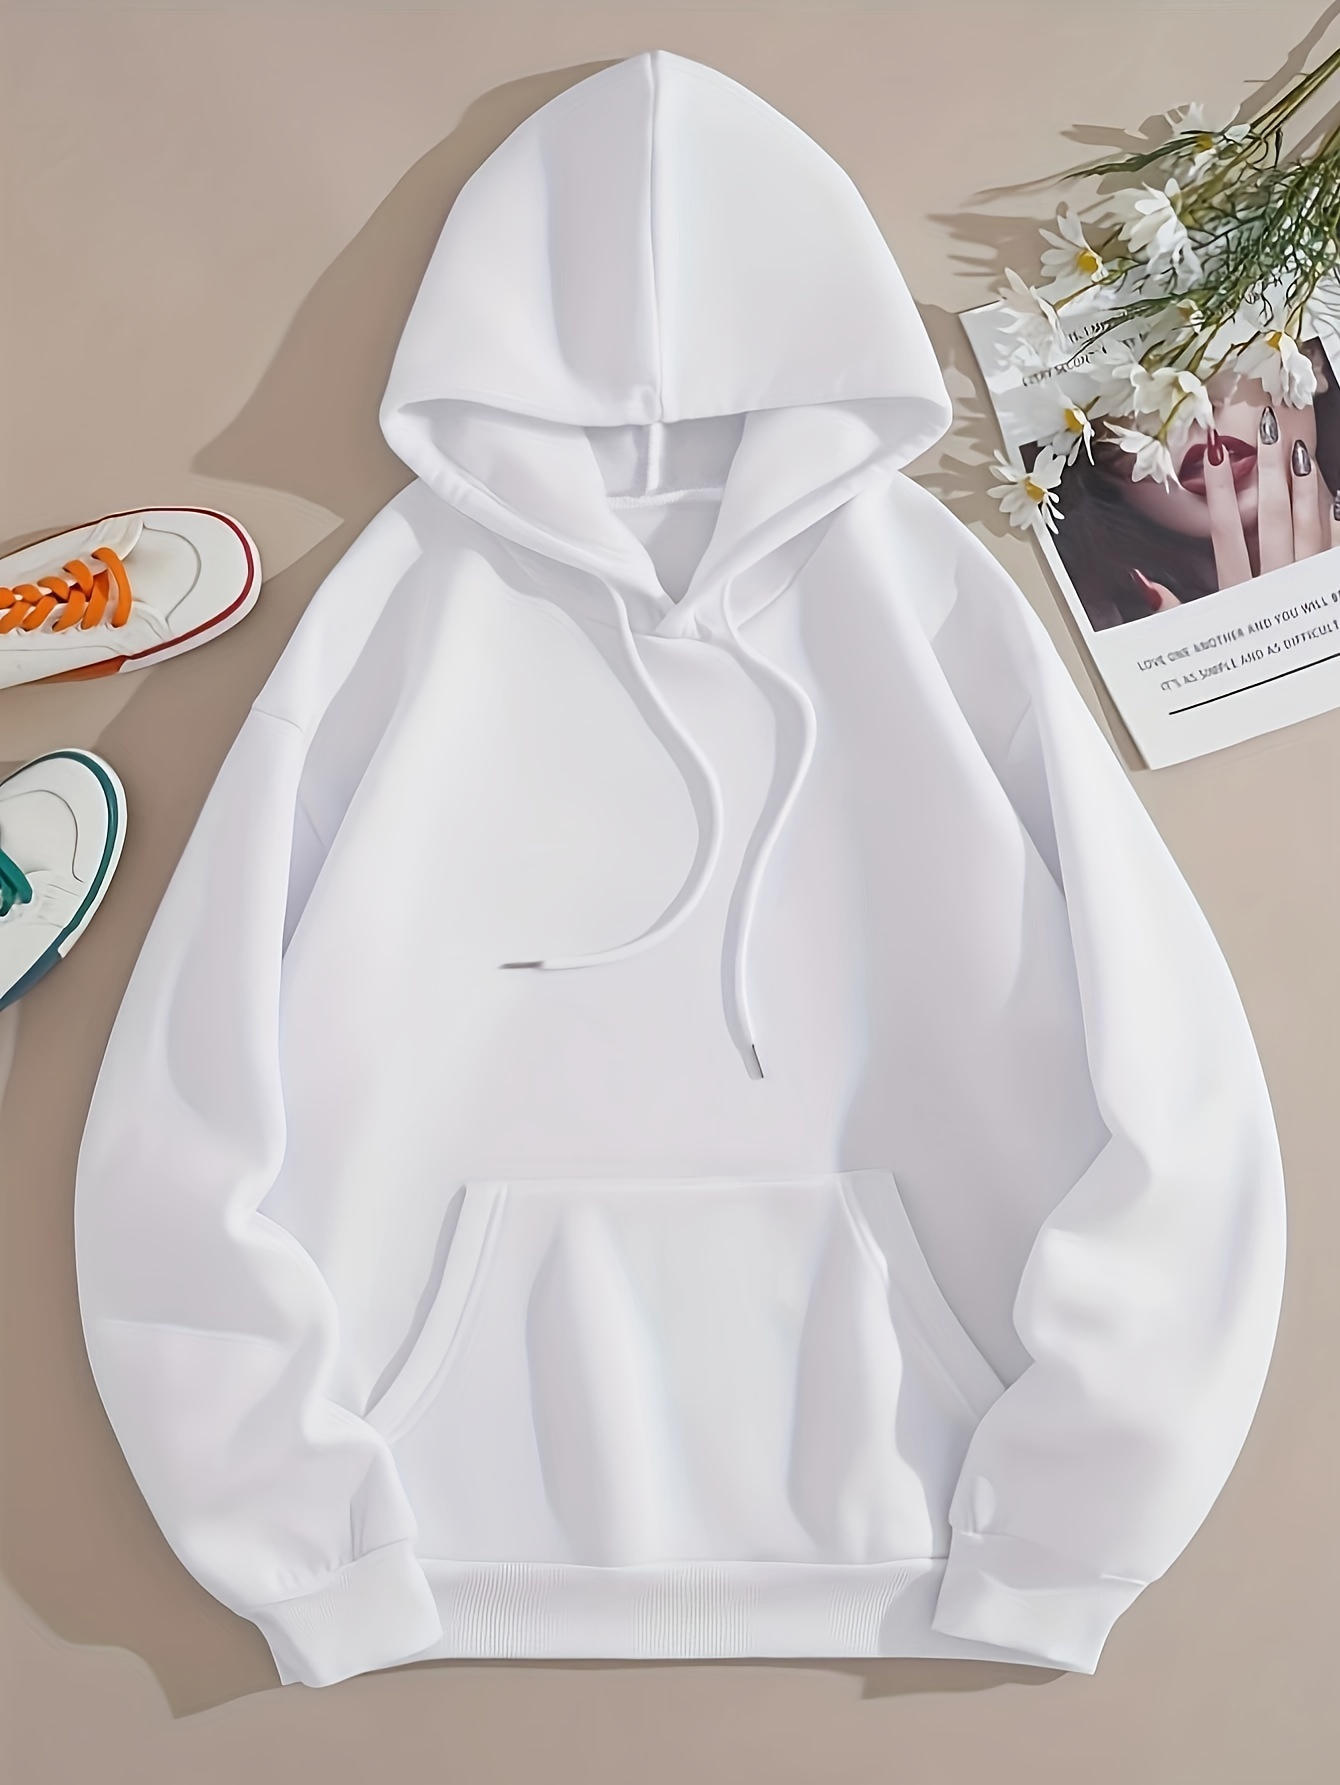 white thermal hoodies long sleeve casual sweatshirt for fall winter womens clothing details 18